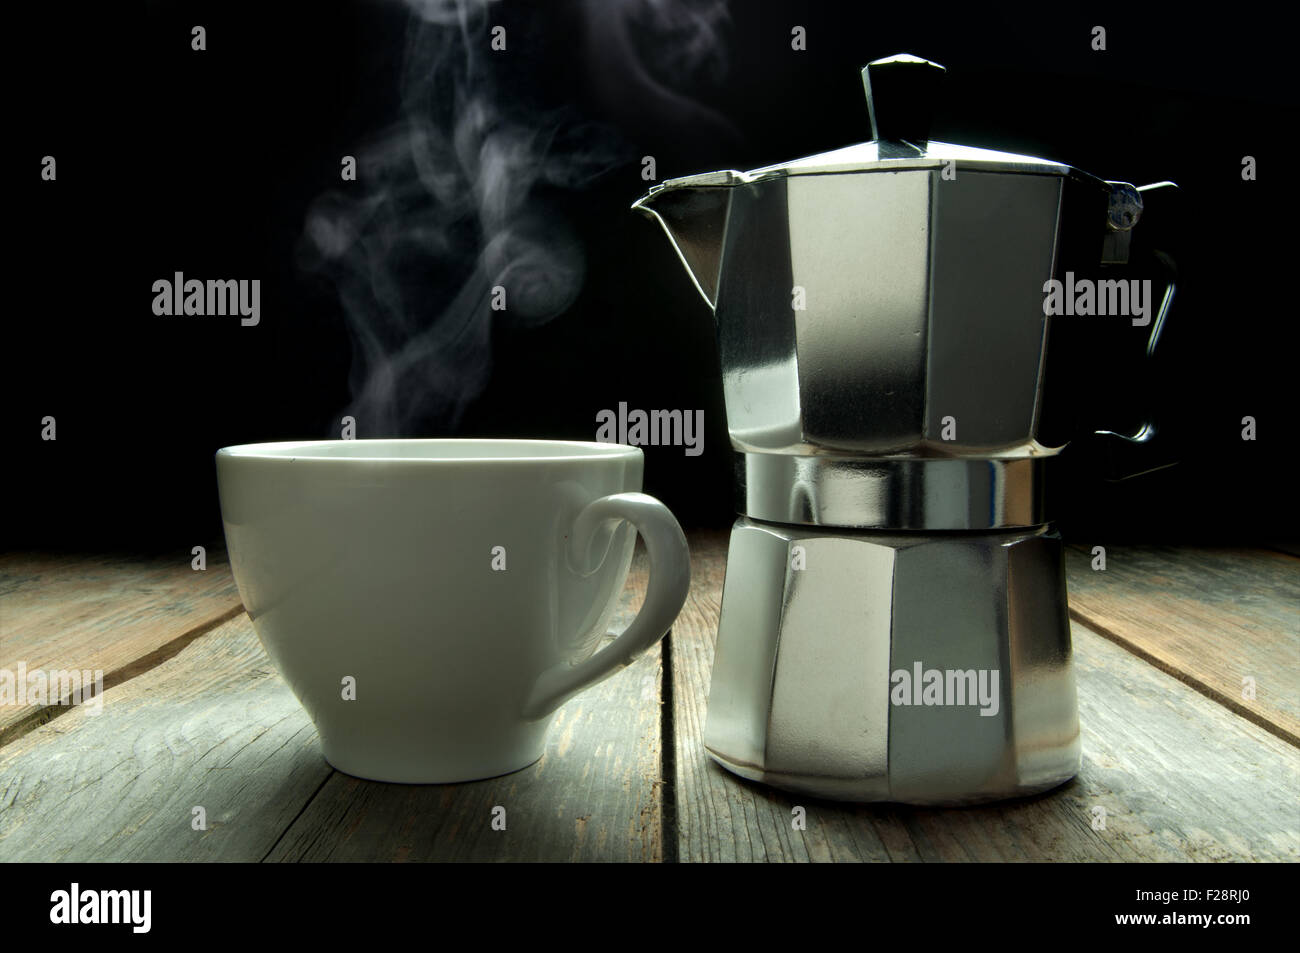 Italian coffee maker next to a hot beverage Stock Photo